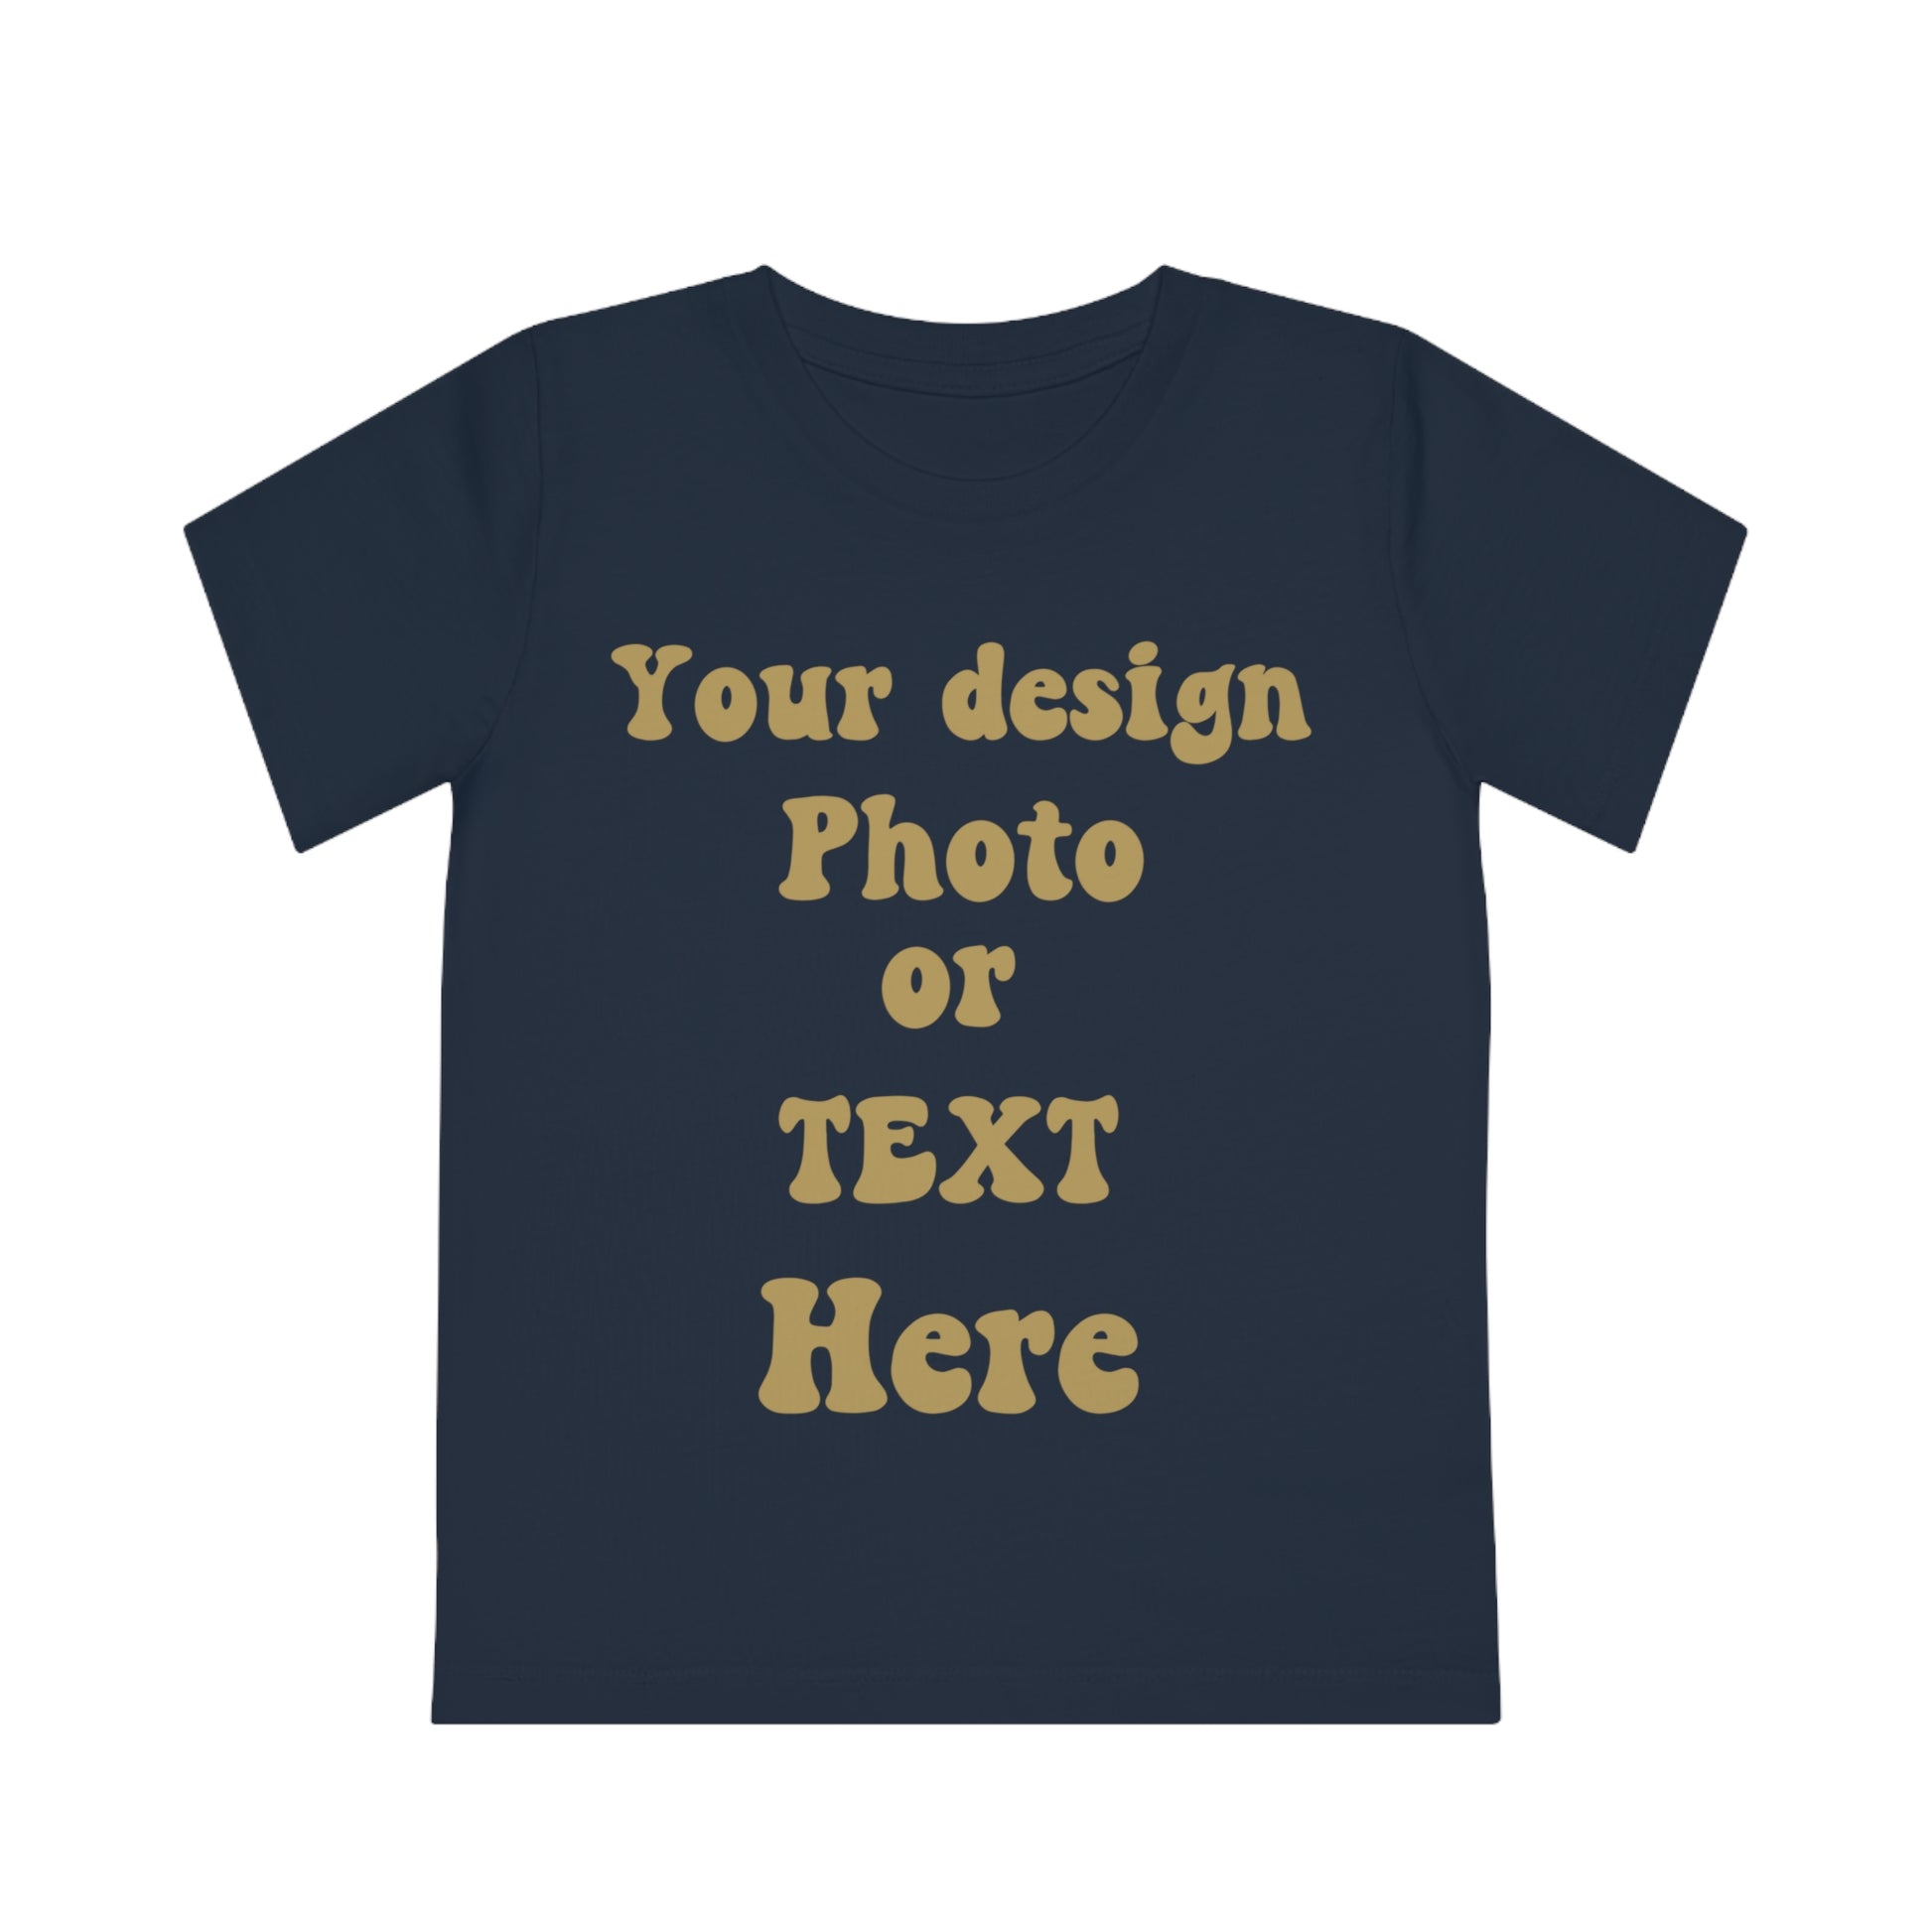 Kids' Personalized T-Shirt - Custom Children's Tee with Your Own Design Kids clothes French Navy 3/4 Years 